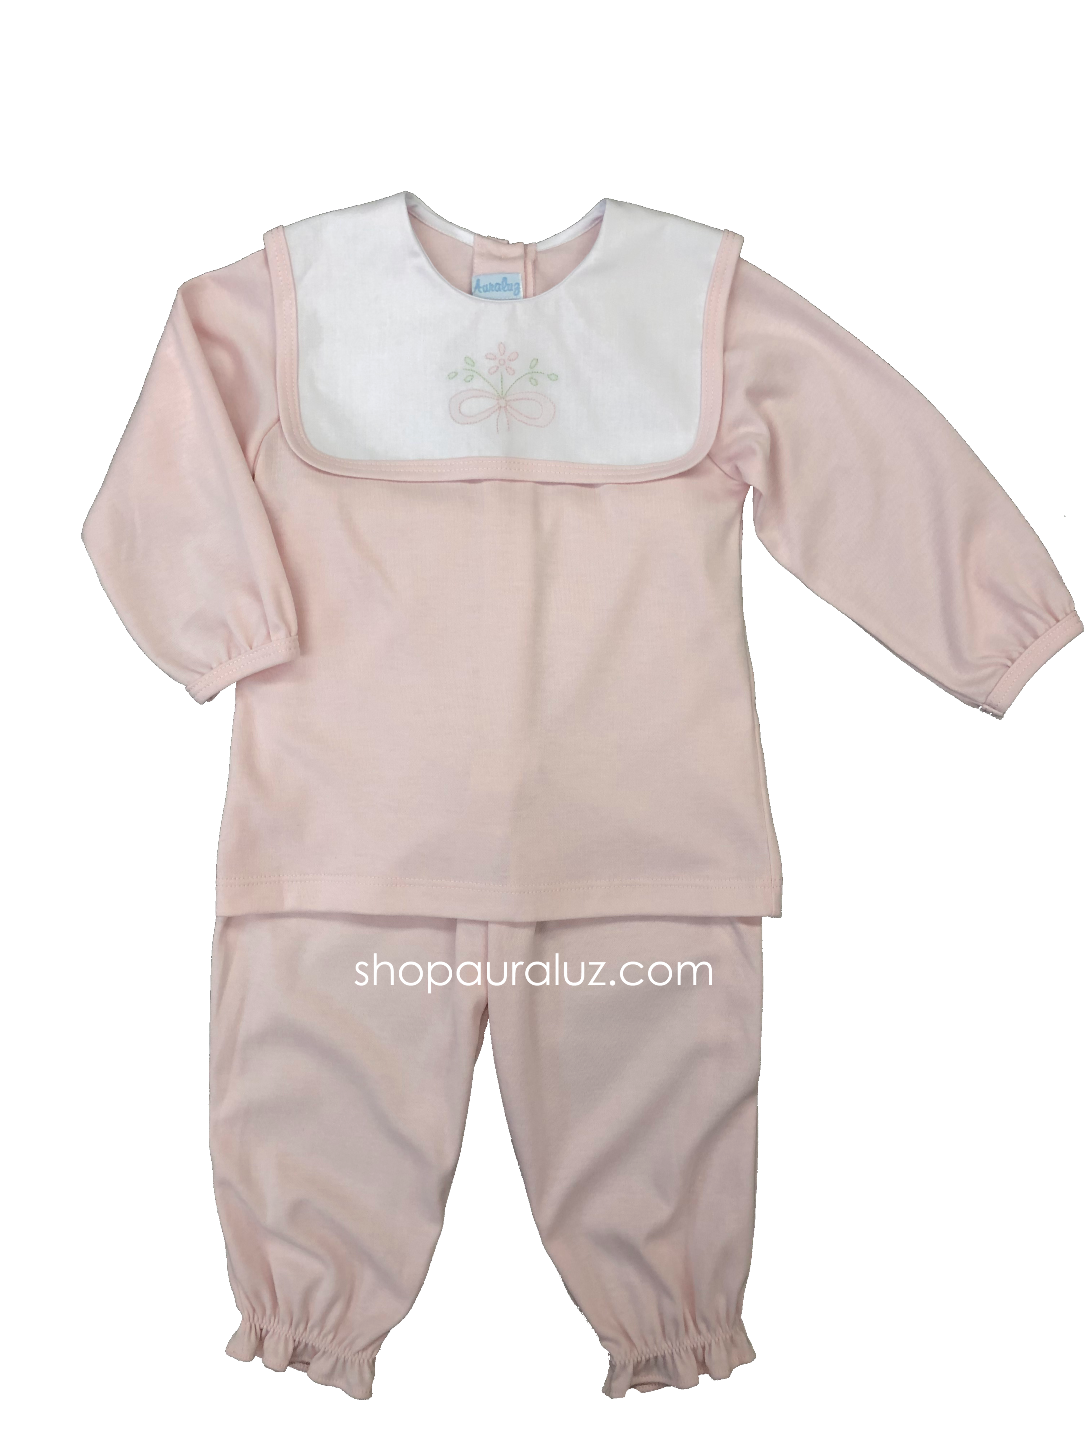 Auraluz Knit Girl 2pc...Pink with white square collar and embroidered bow